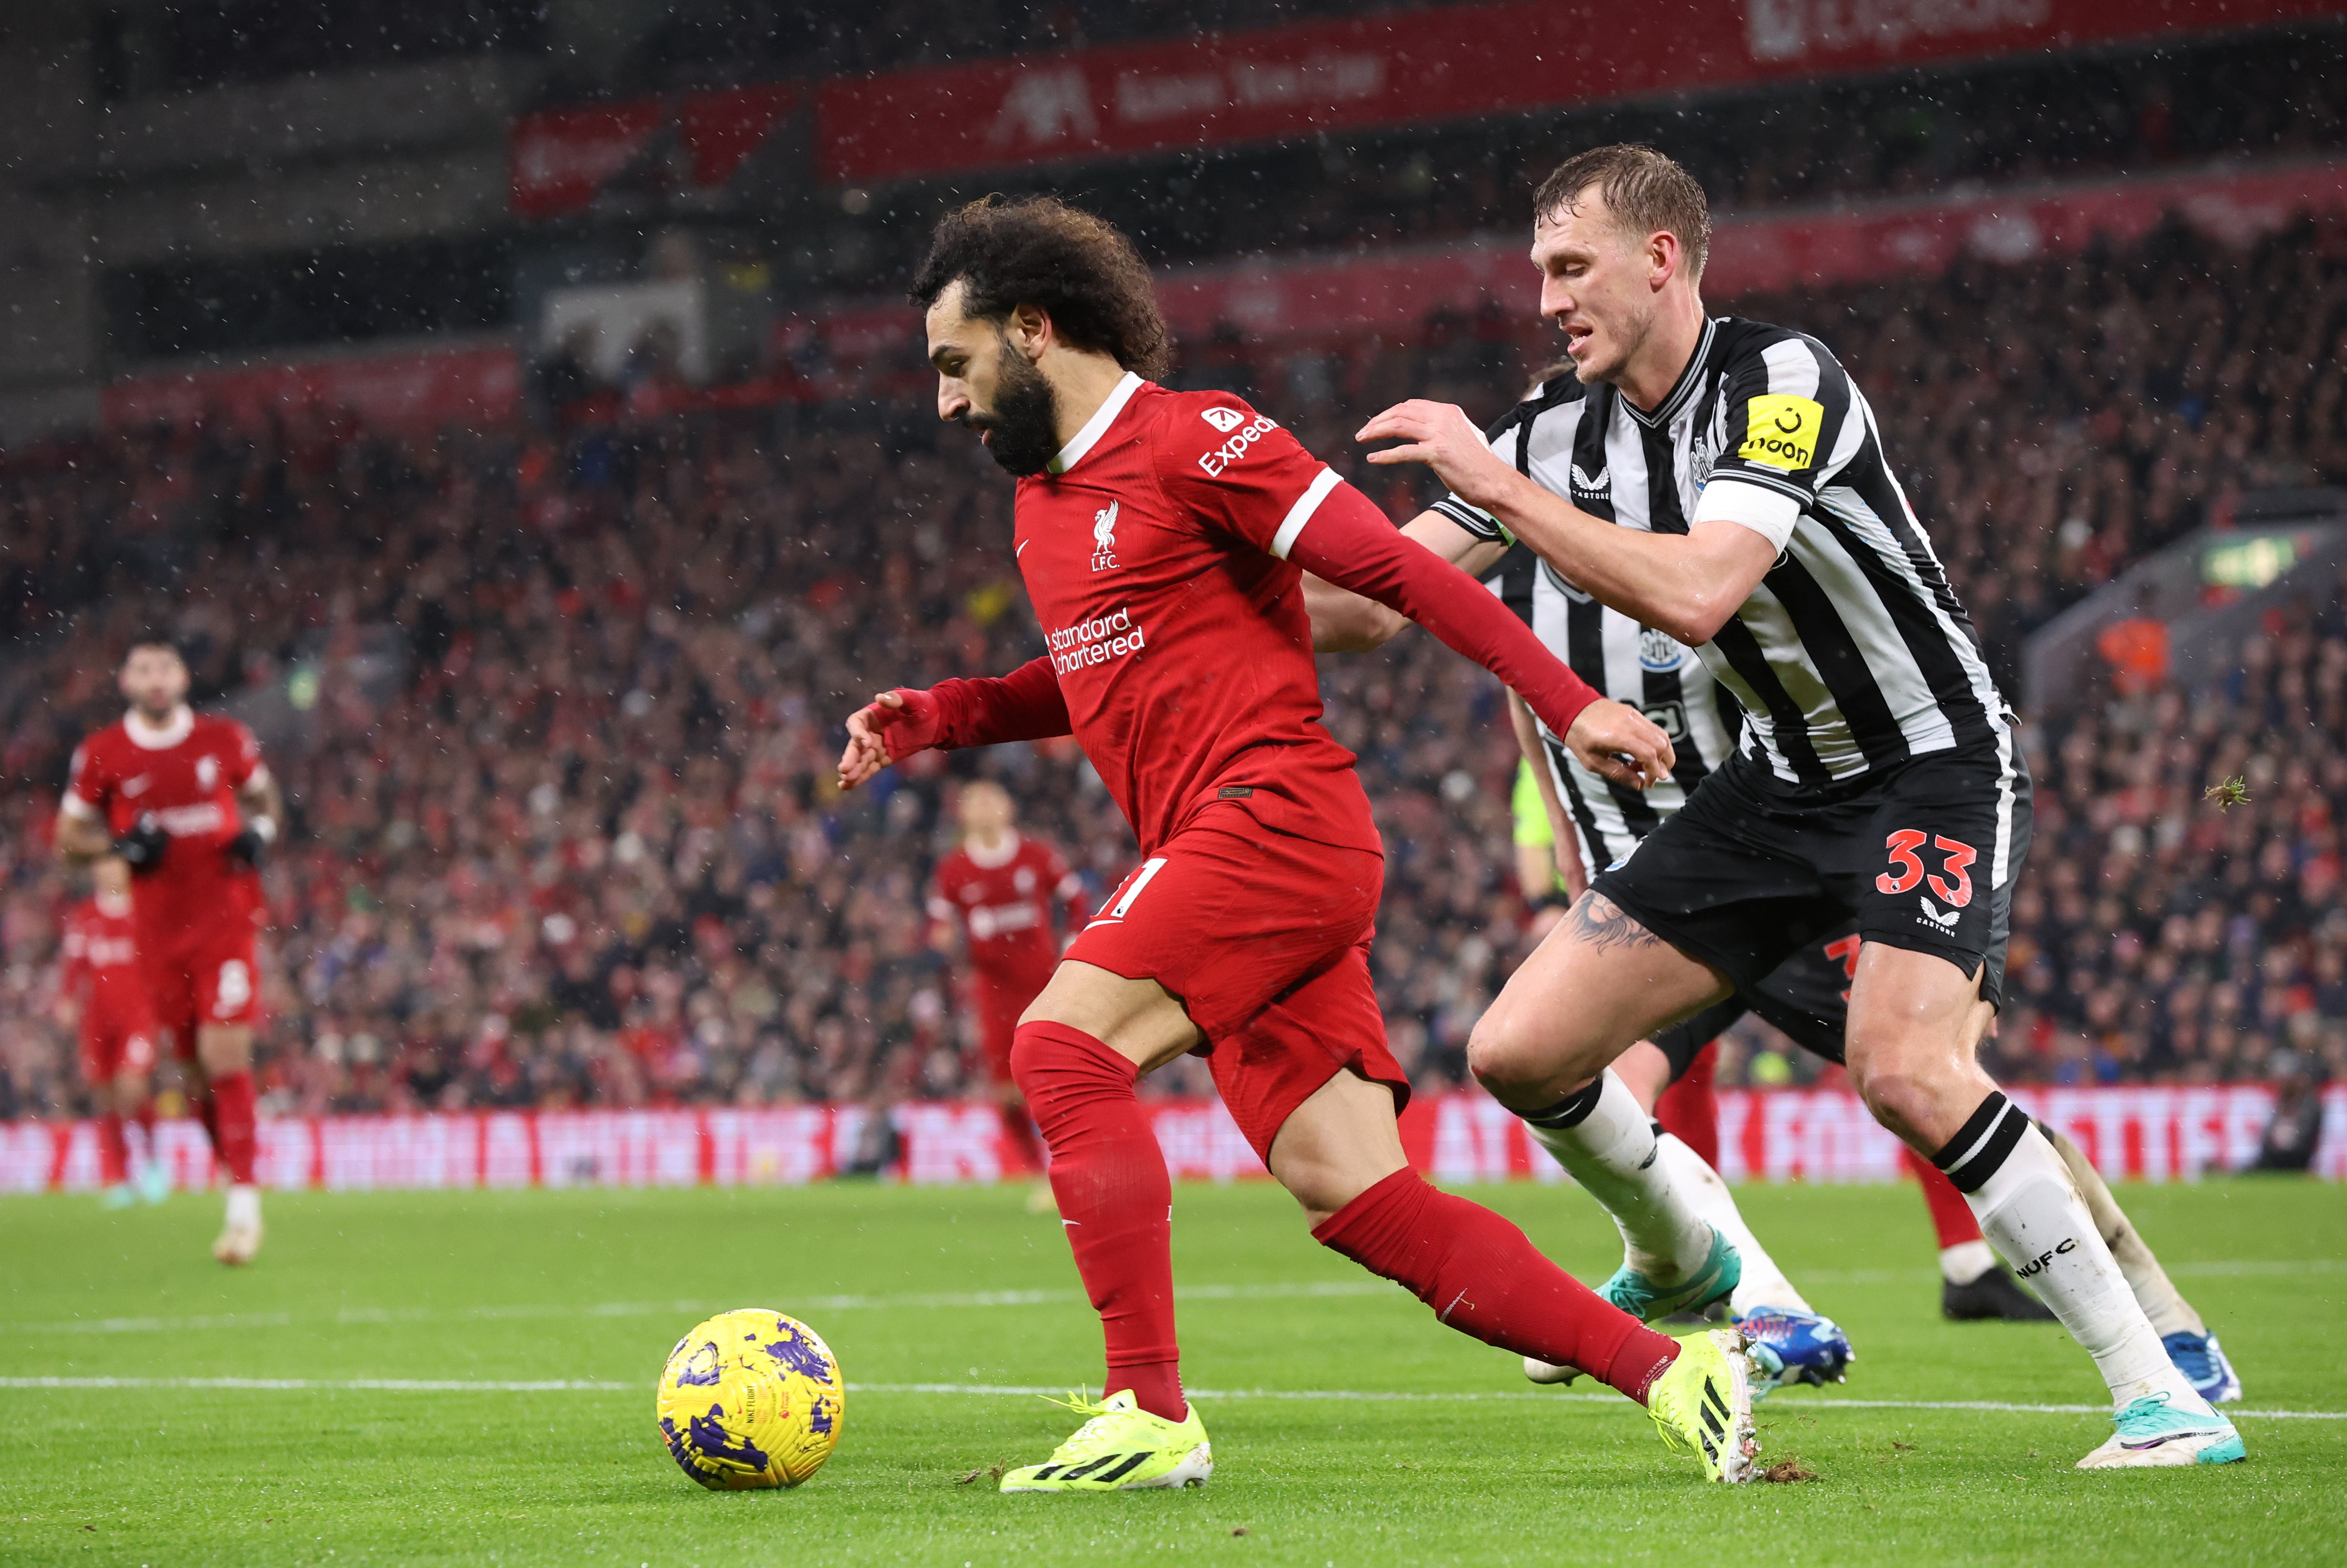 Mohamed Salah has arguably been the Premier League’s best player this season